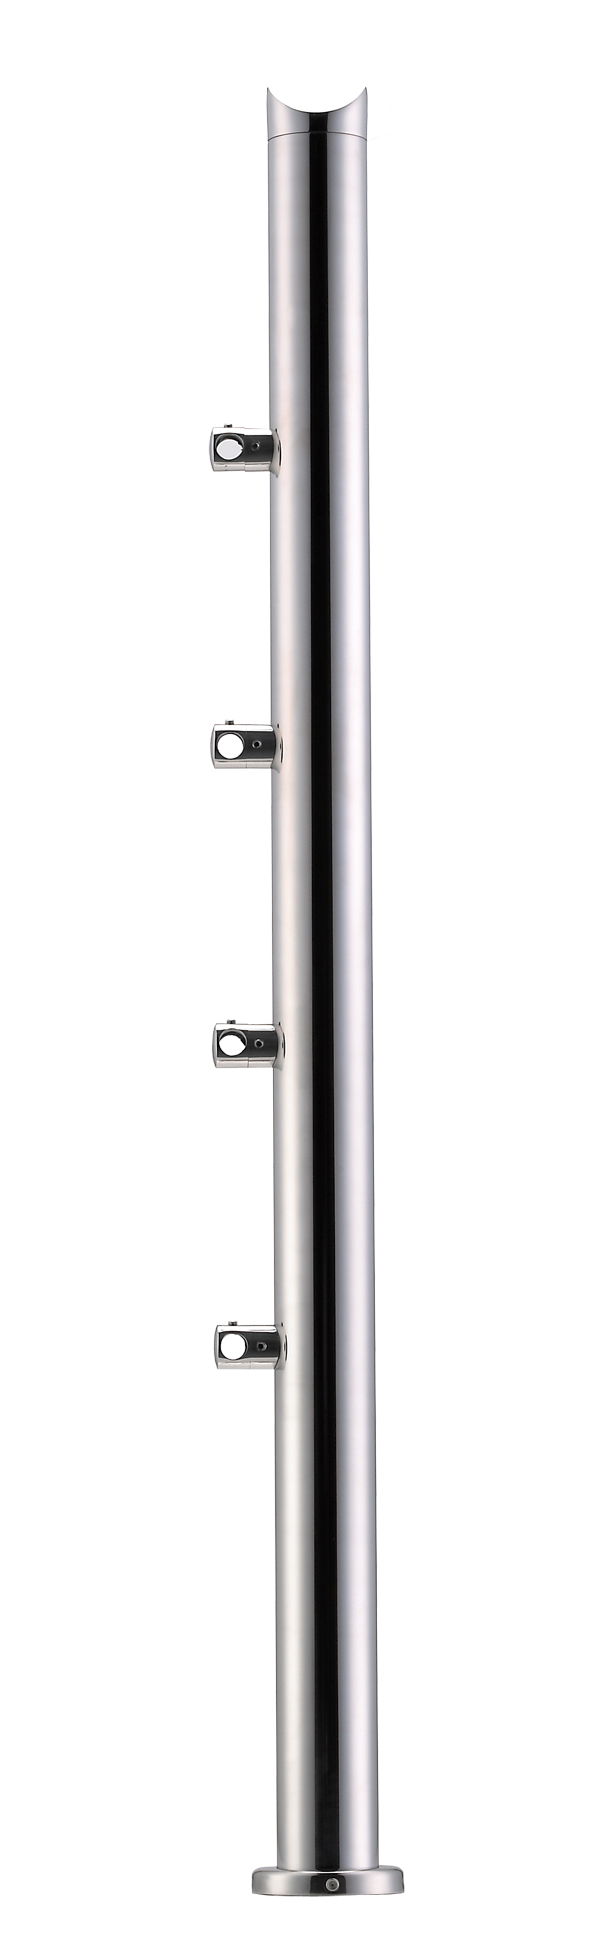 Stainless Steel Balustrade Posts - Tubular - SS:2020478A